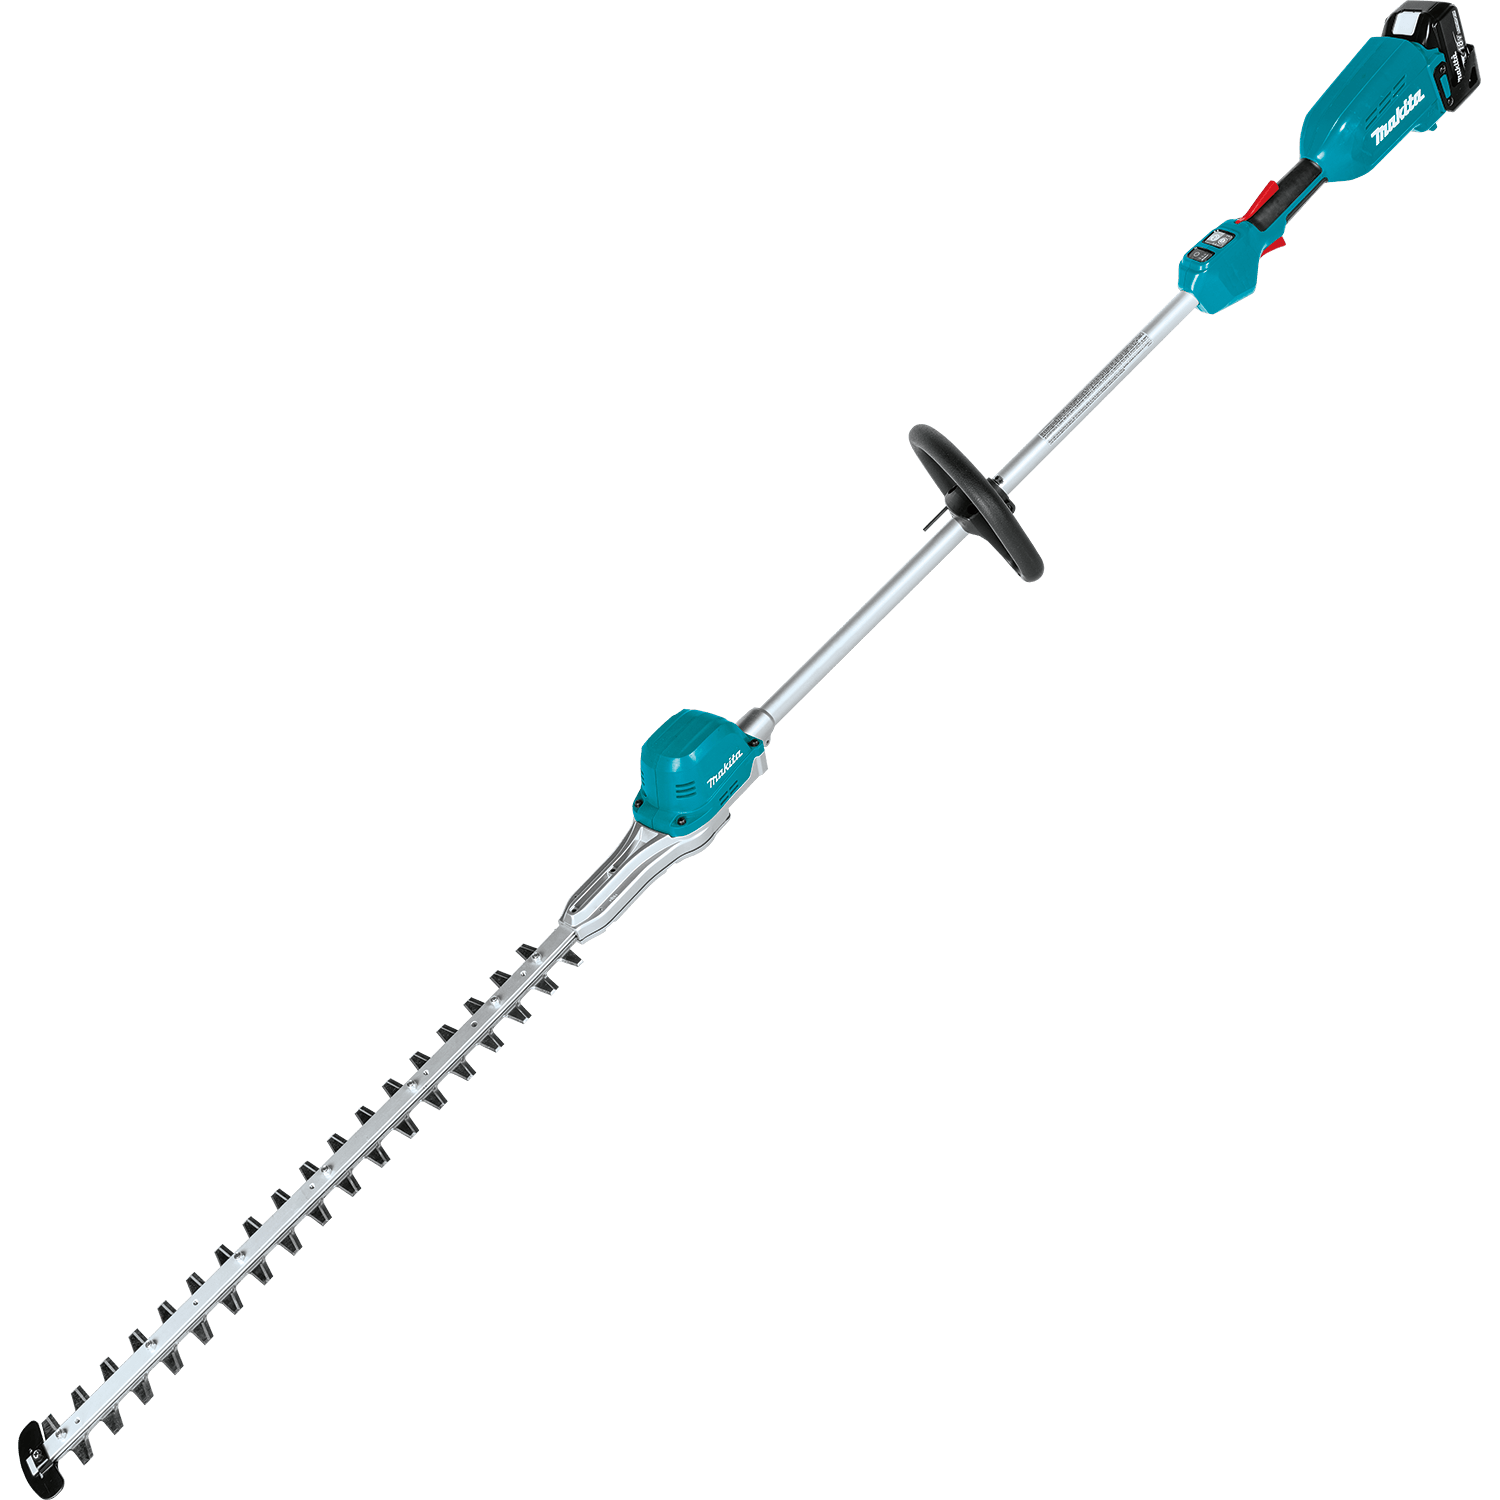 New From Makita: Pole Hedge Trimmers